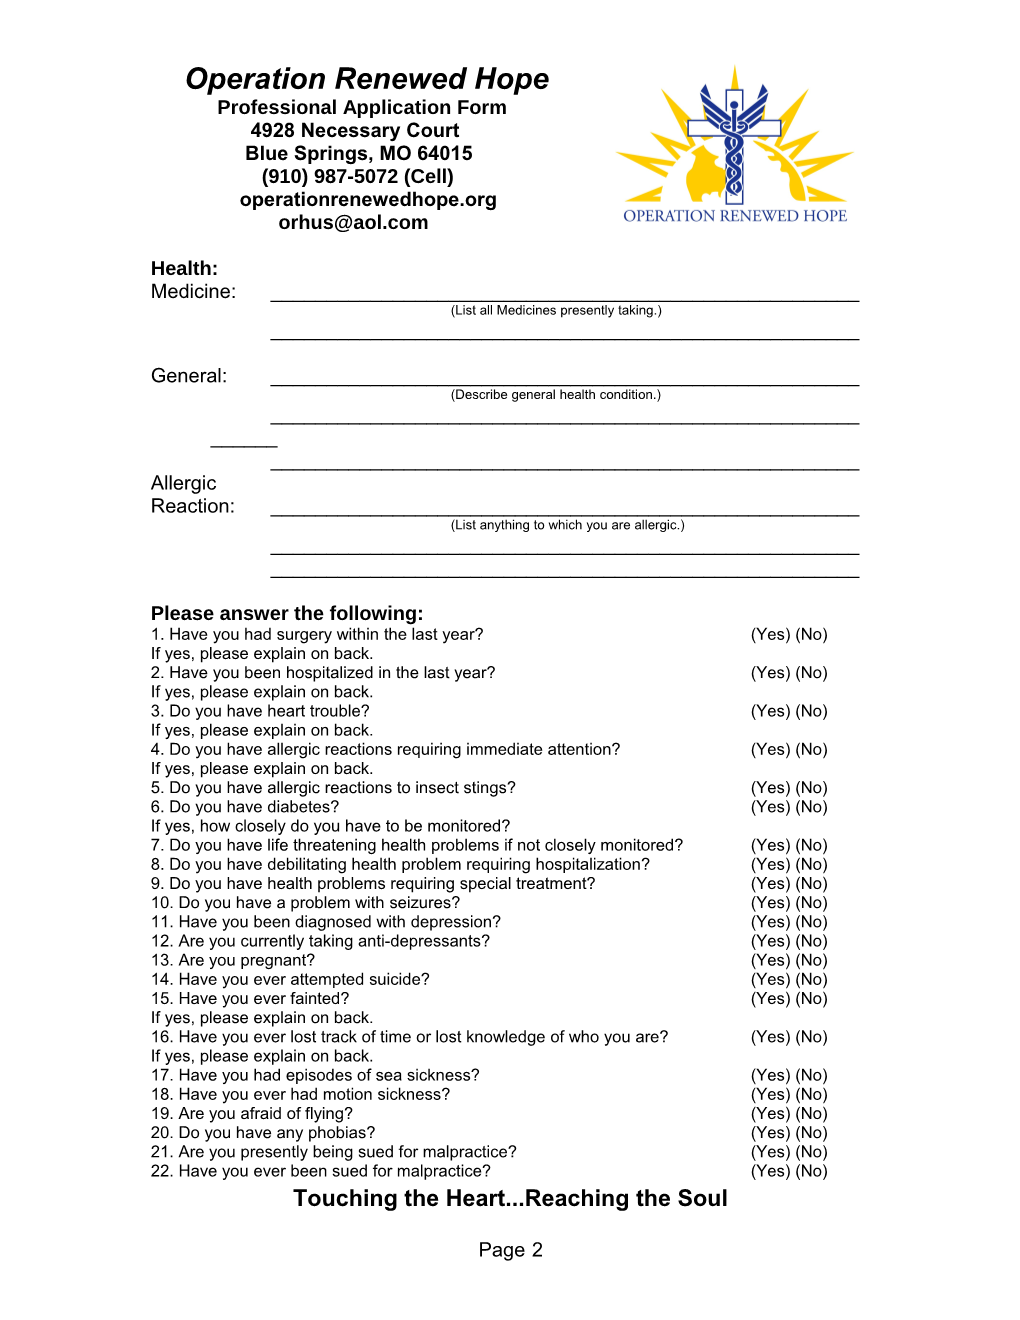 Professional Application Form 4928 Necessary Court Blue Springs, MO 64015